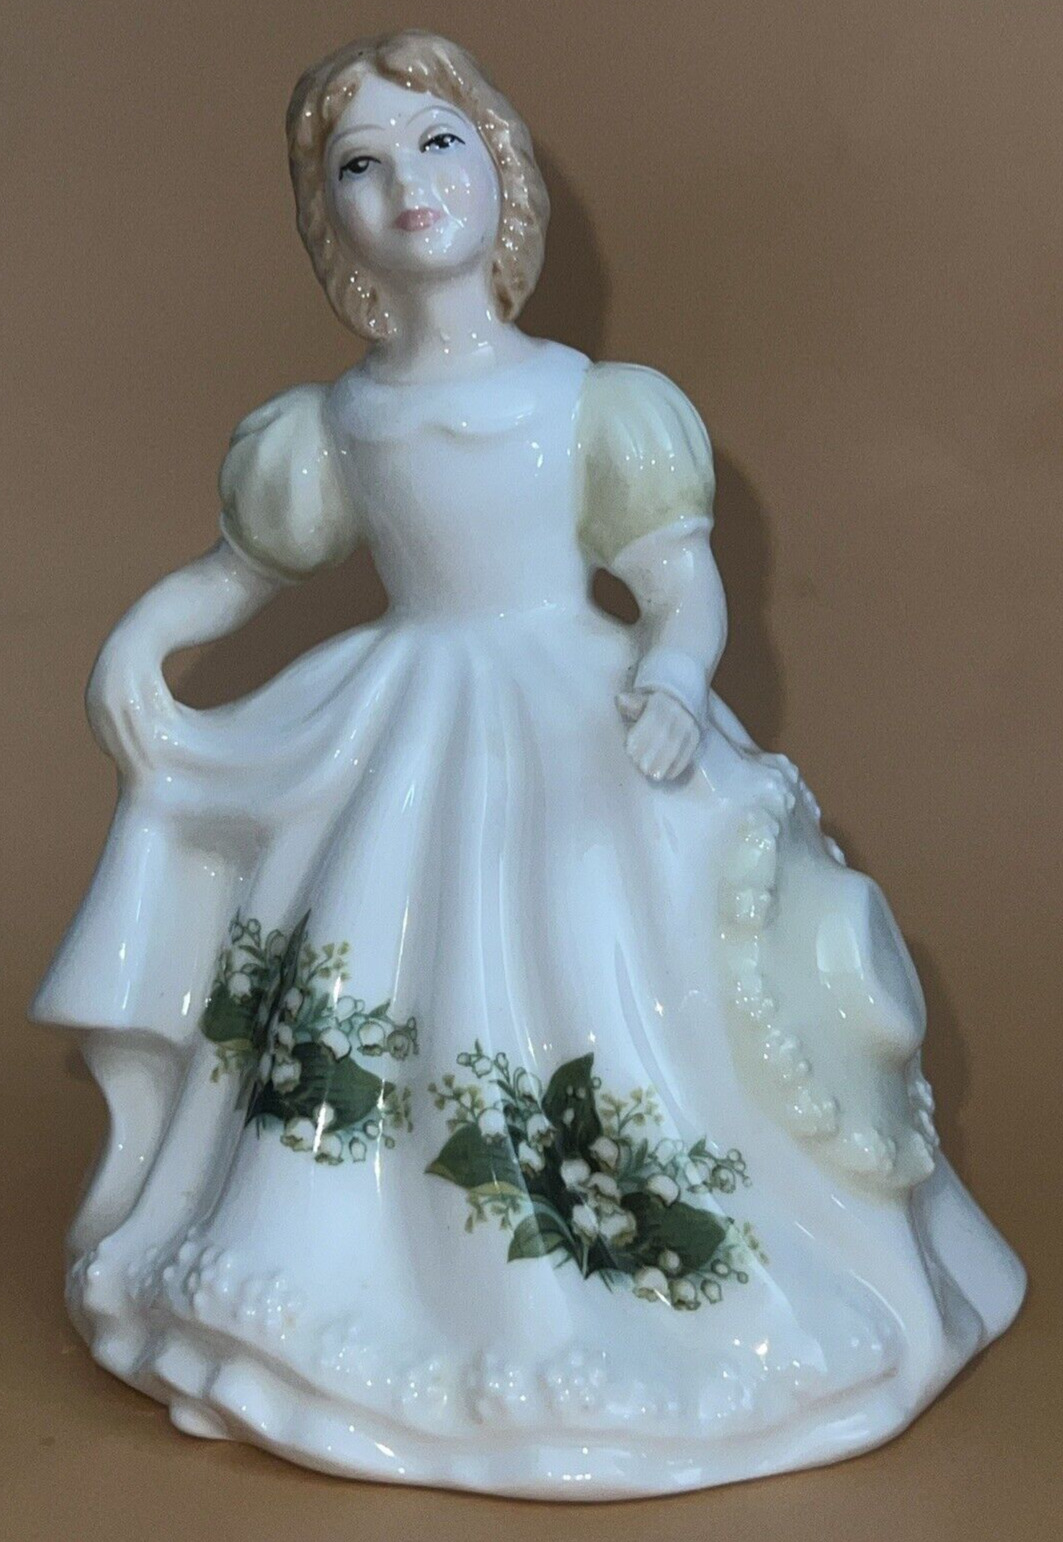 Flower of the Month May Child Figurine Royal Doulton HN3334 England Vintage